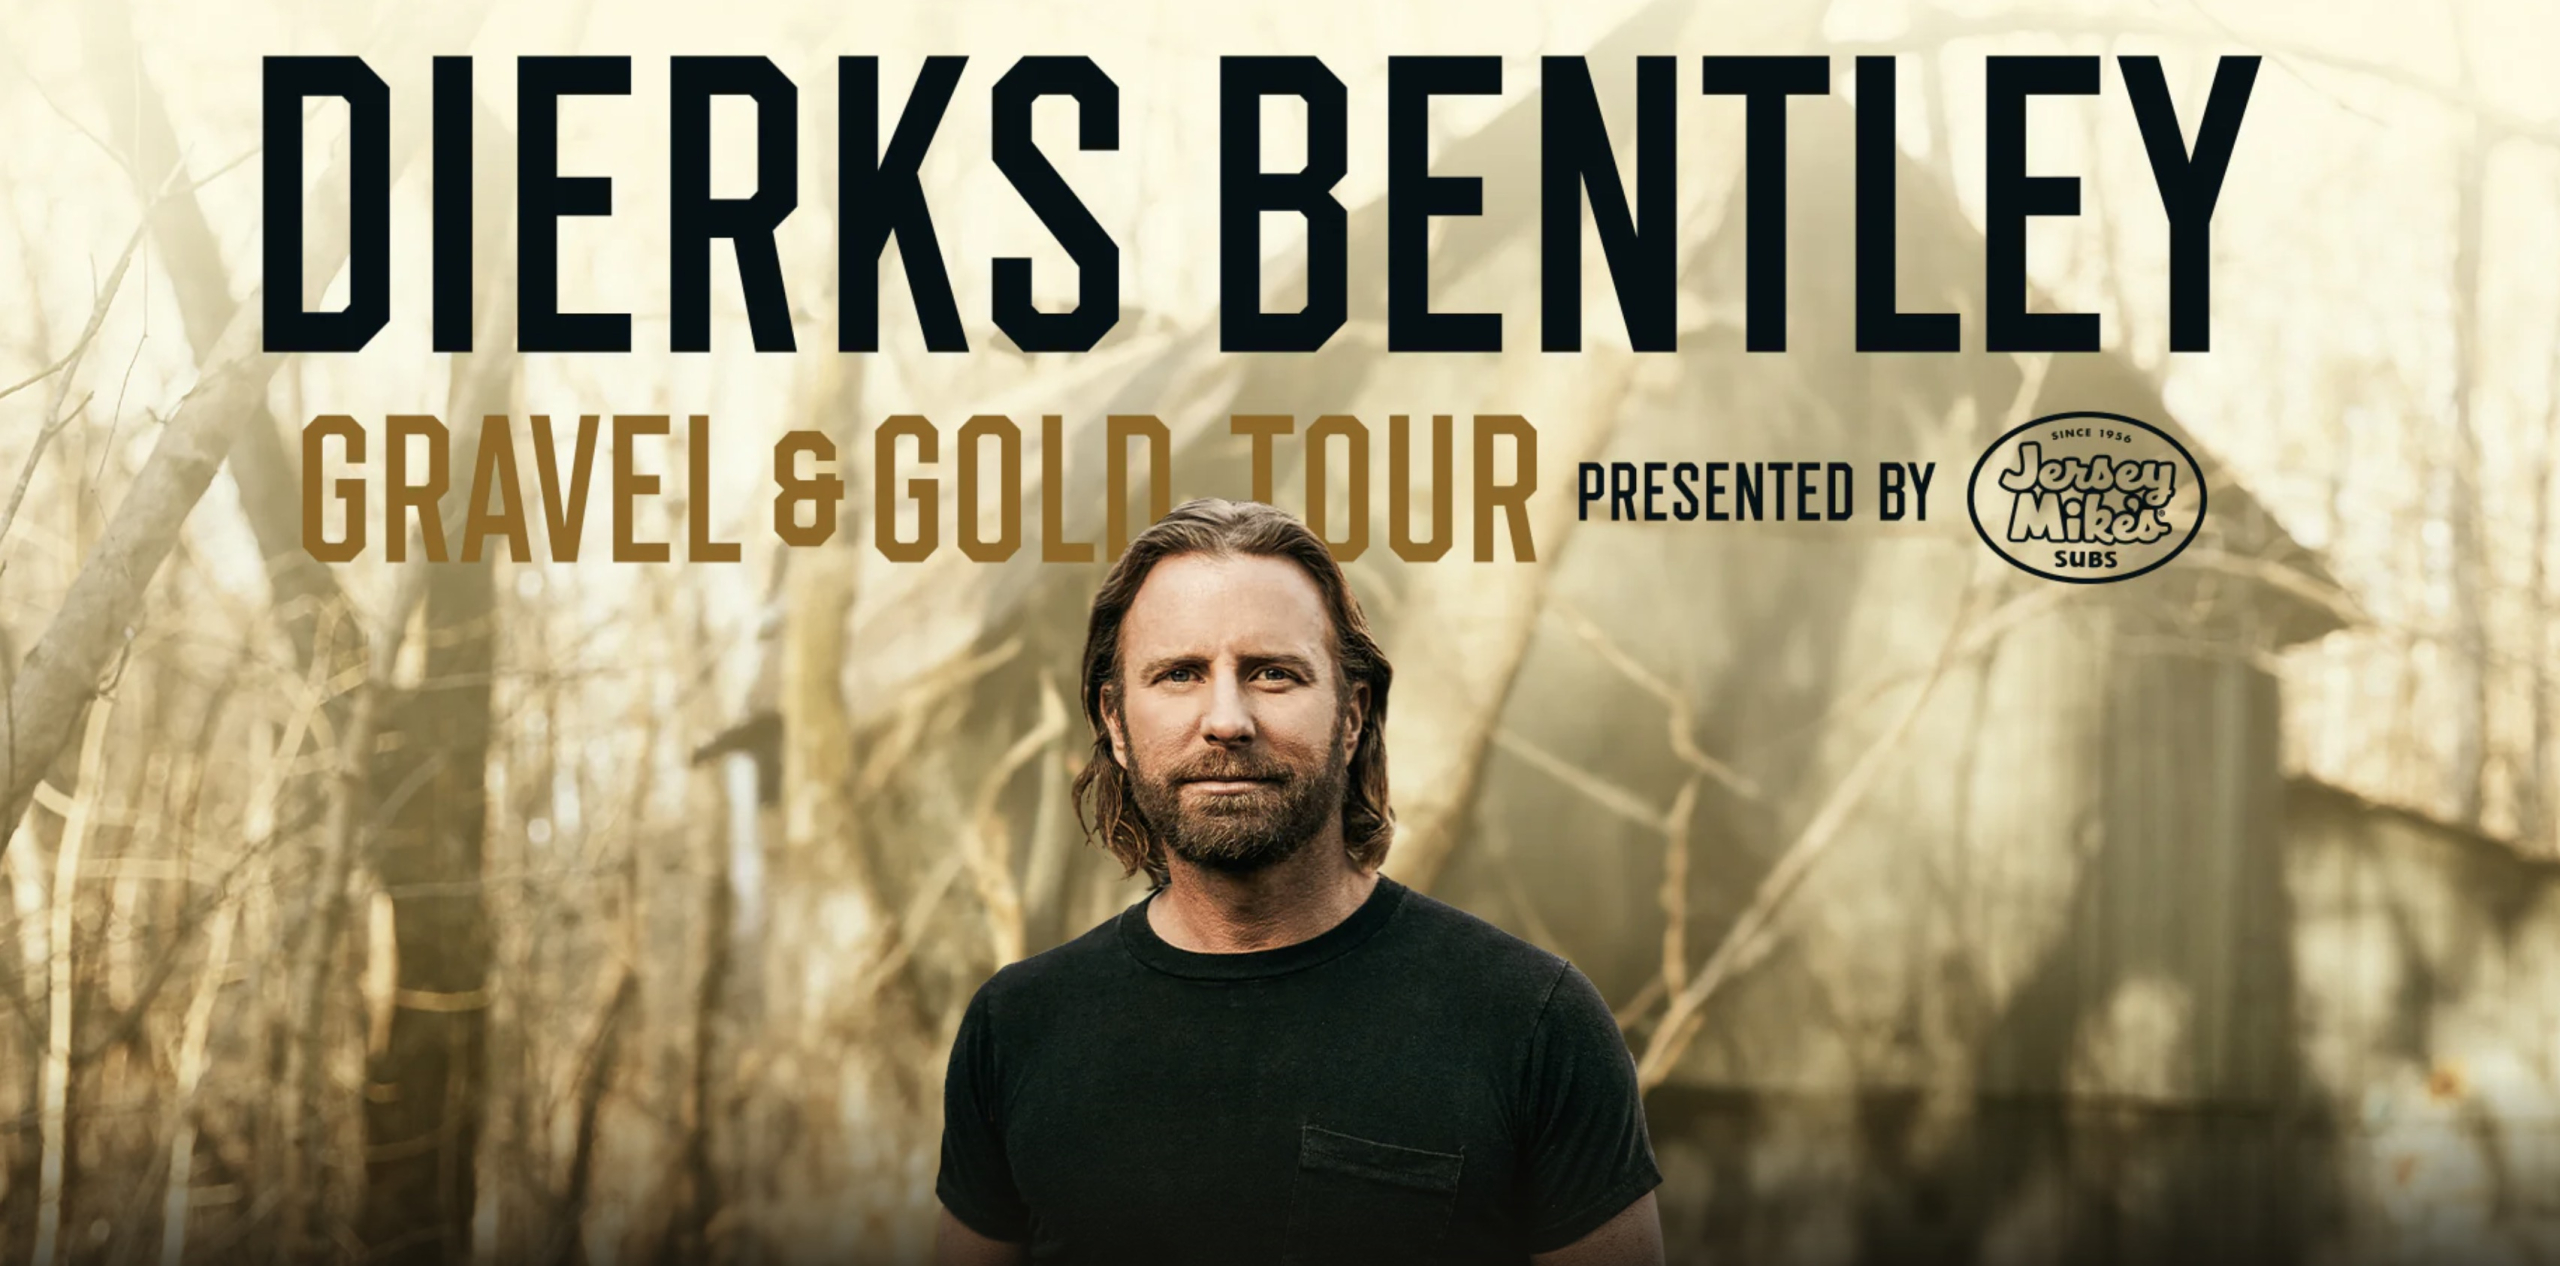 DIERKS BENTLEY: GRAVEL & GOLD PRESENTED BY JERSEY MIKE’S